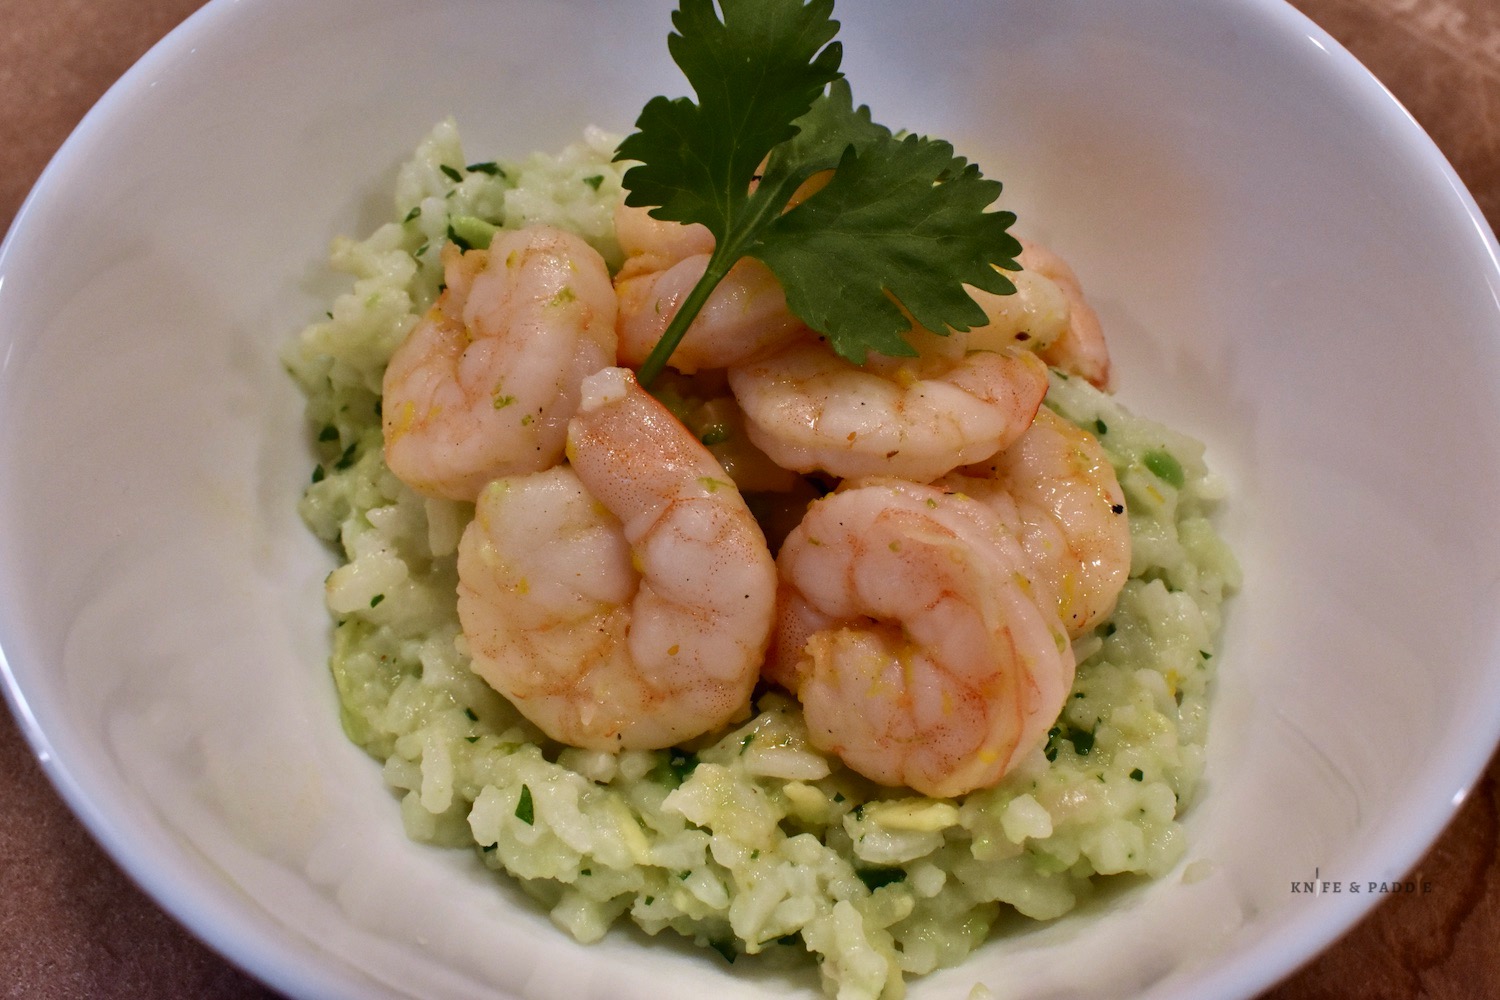 Tequila Lime Shrimp over rice